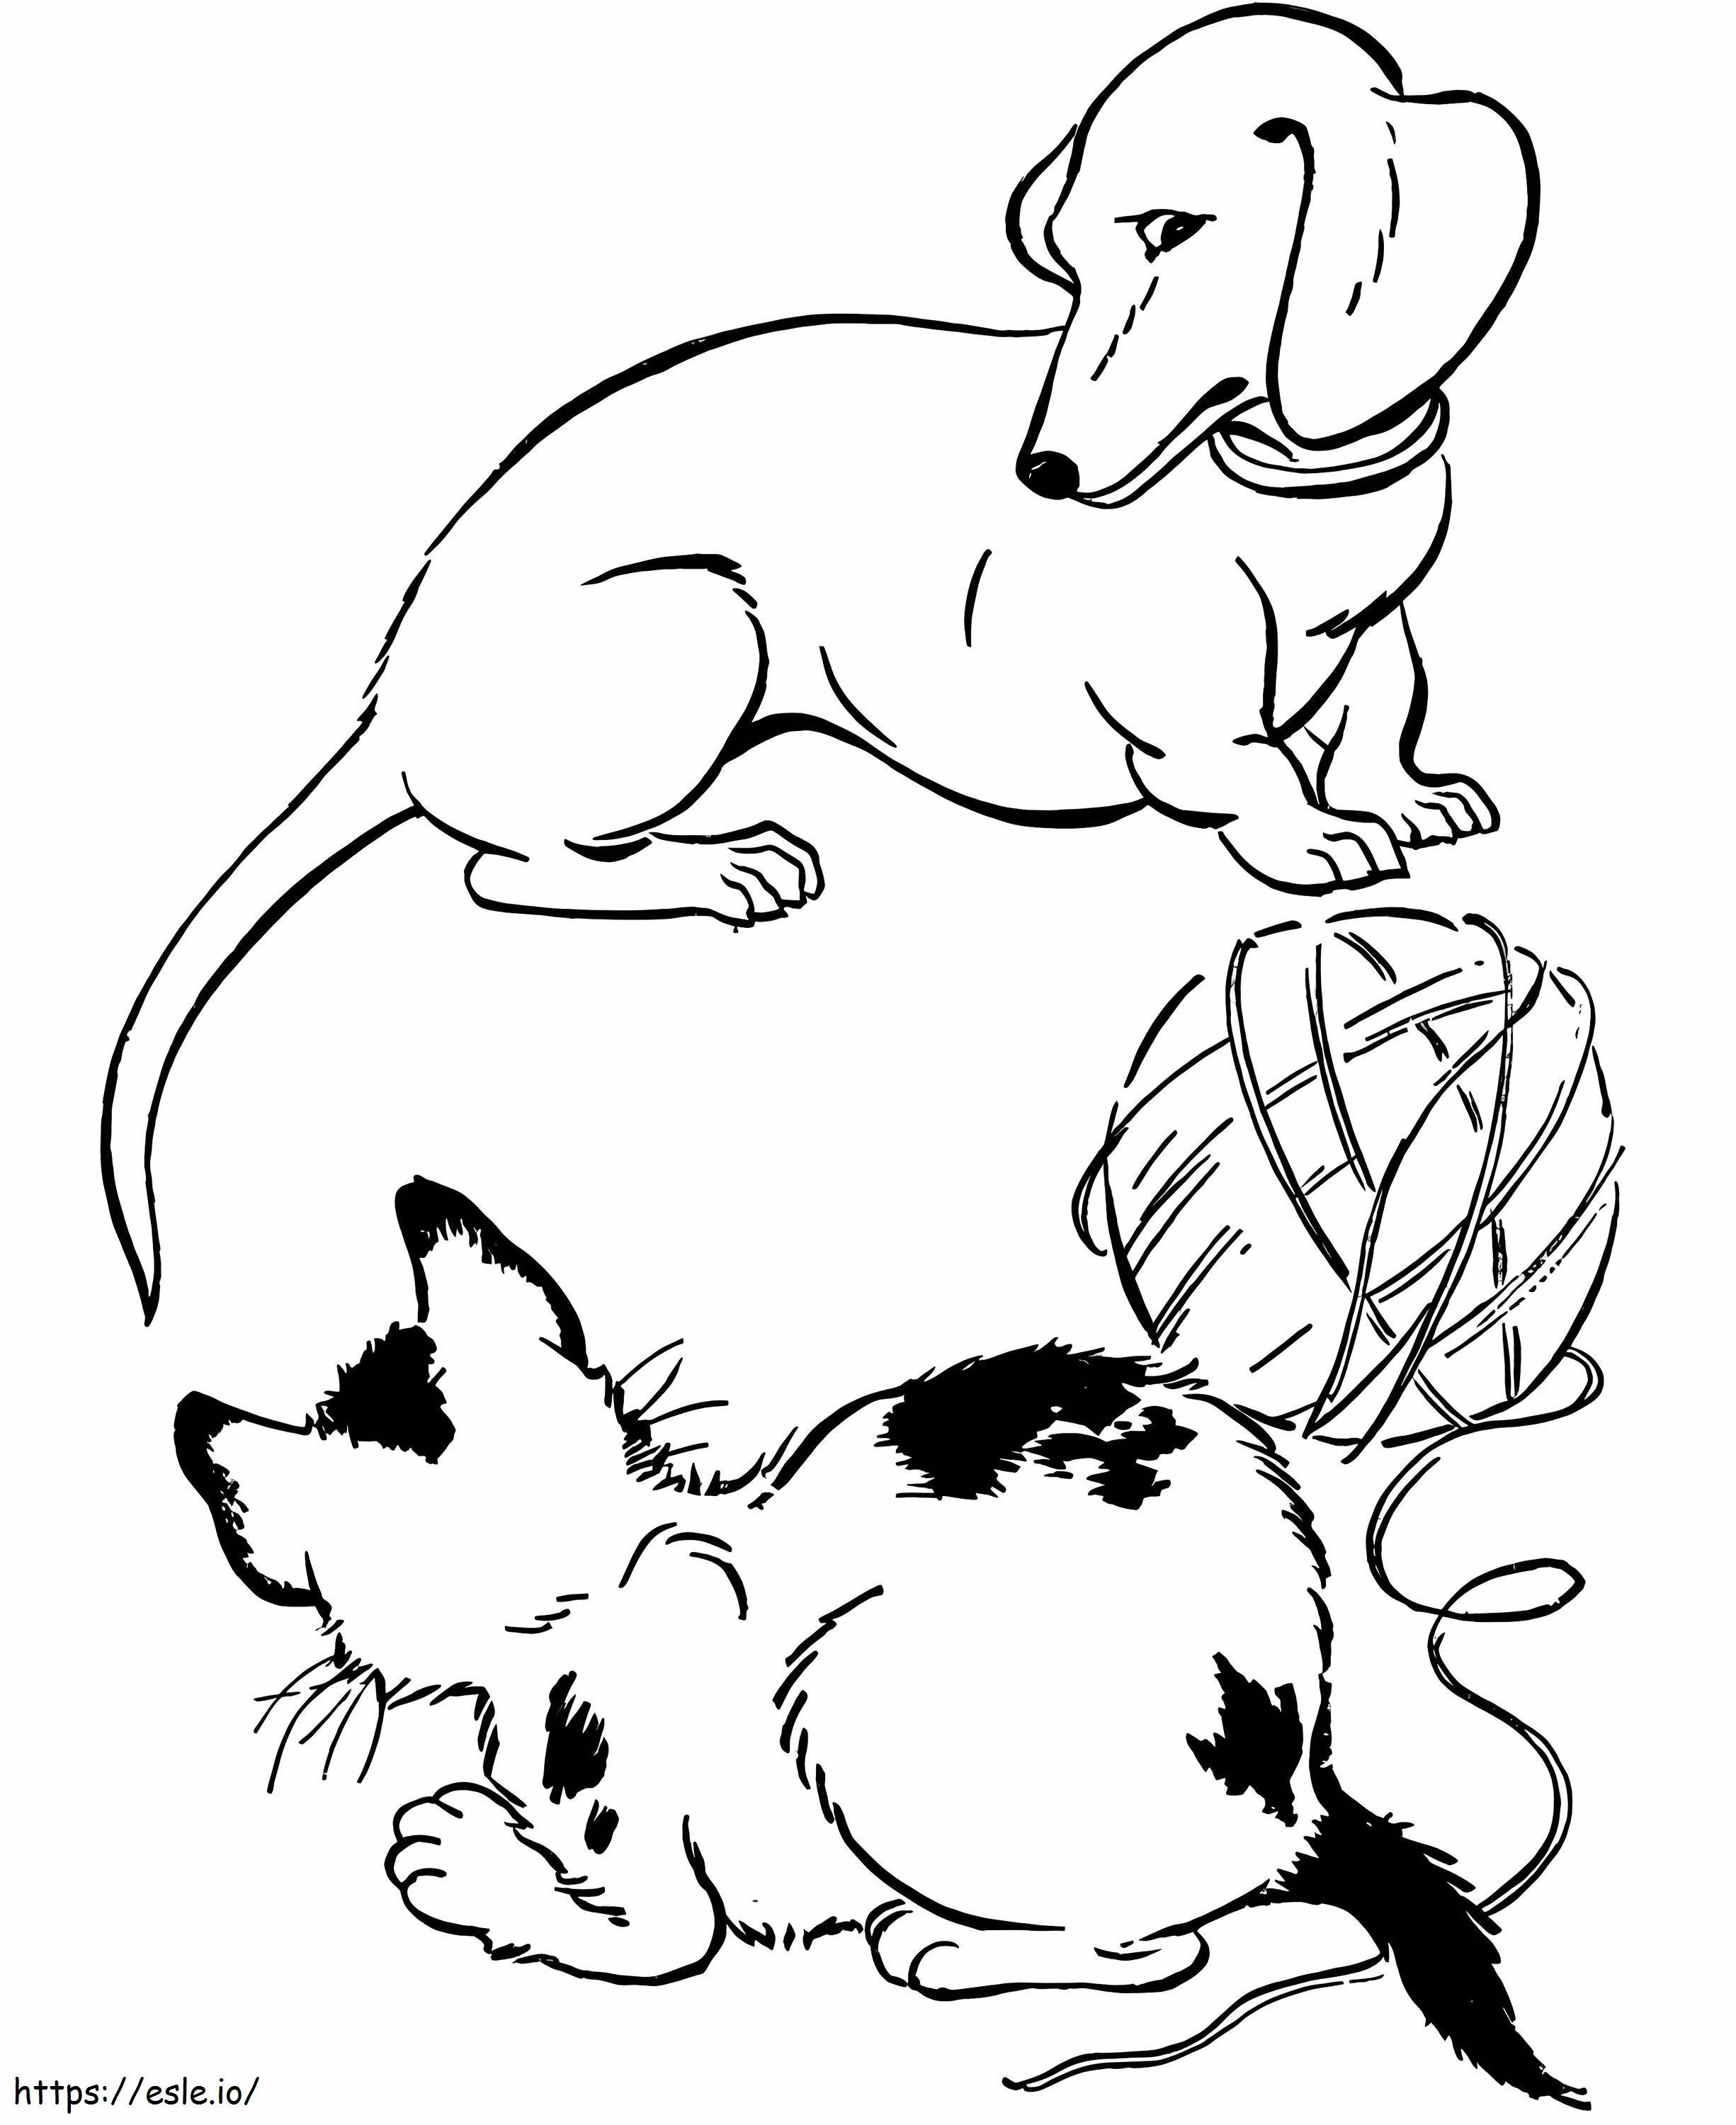 Dachshund And Cat coloring page